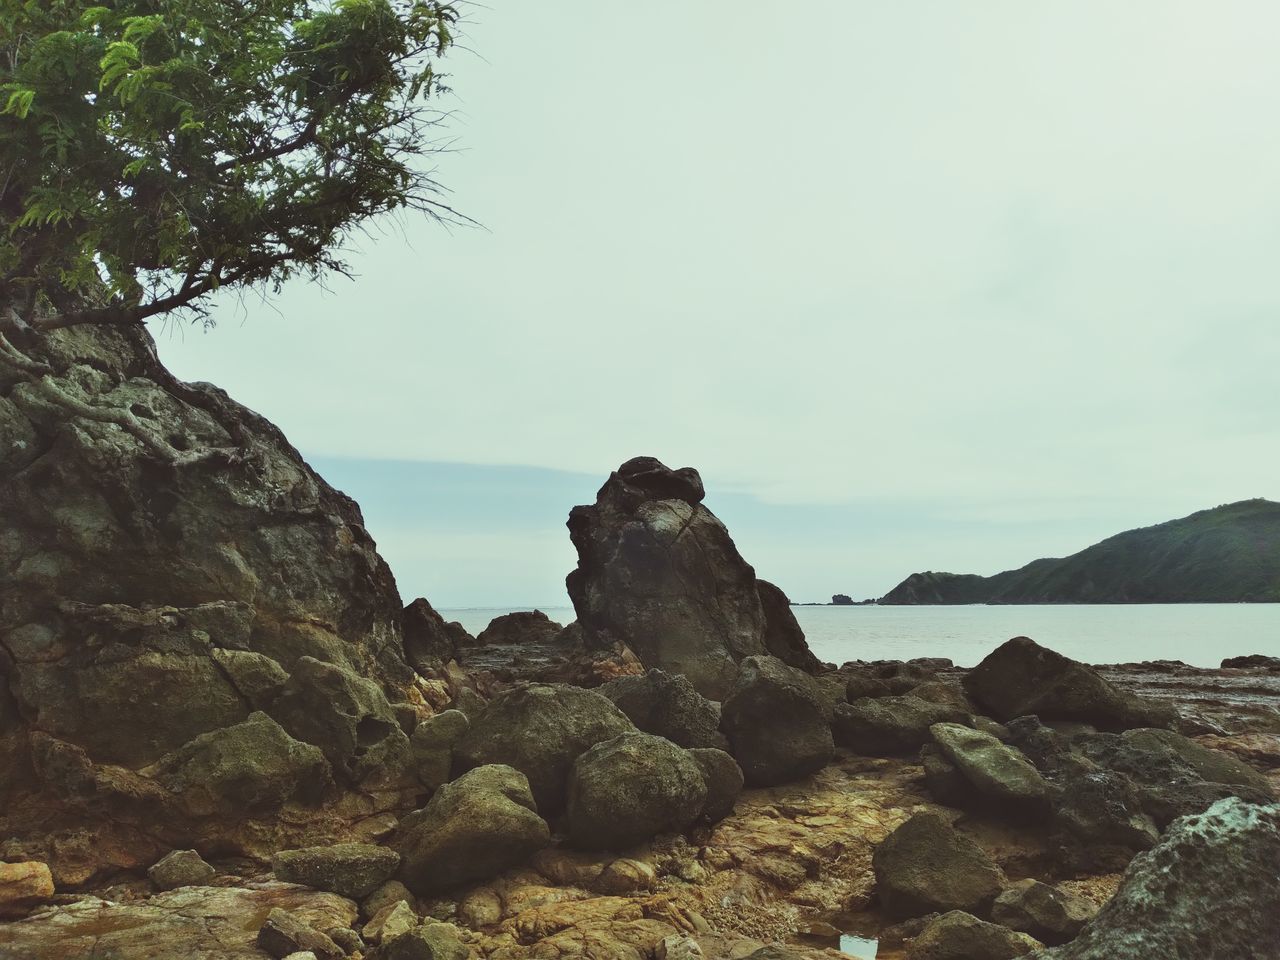 rock, sky, sea, nature, beauty in nature, coast, land, scenics - nature, water, tranquility, beach, rock formation, tranquil scene, no people, environment, ocean, mountain, non-urban scene, terrain, landscape, cliff, outdoors, travel destinations, cloud, tree, shore, plant, day, travel, bay, idyllic, geology